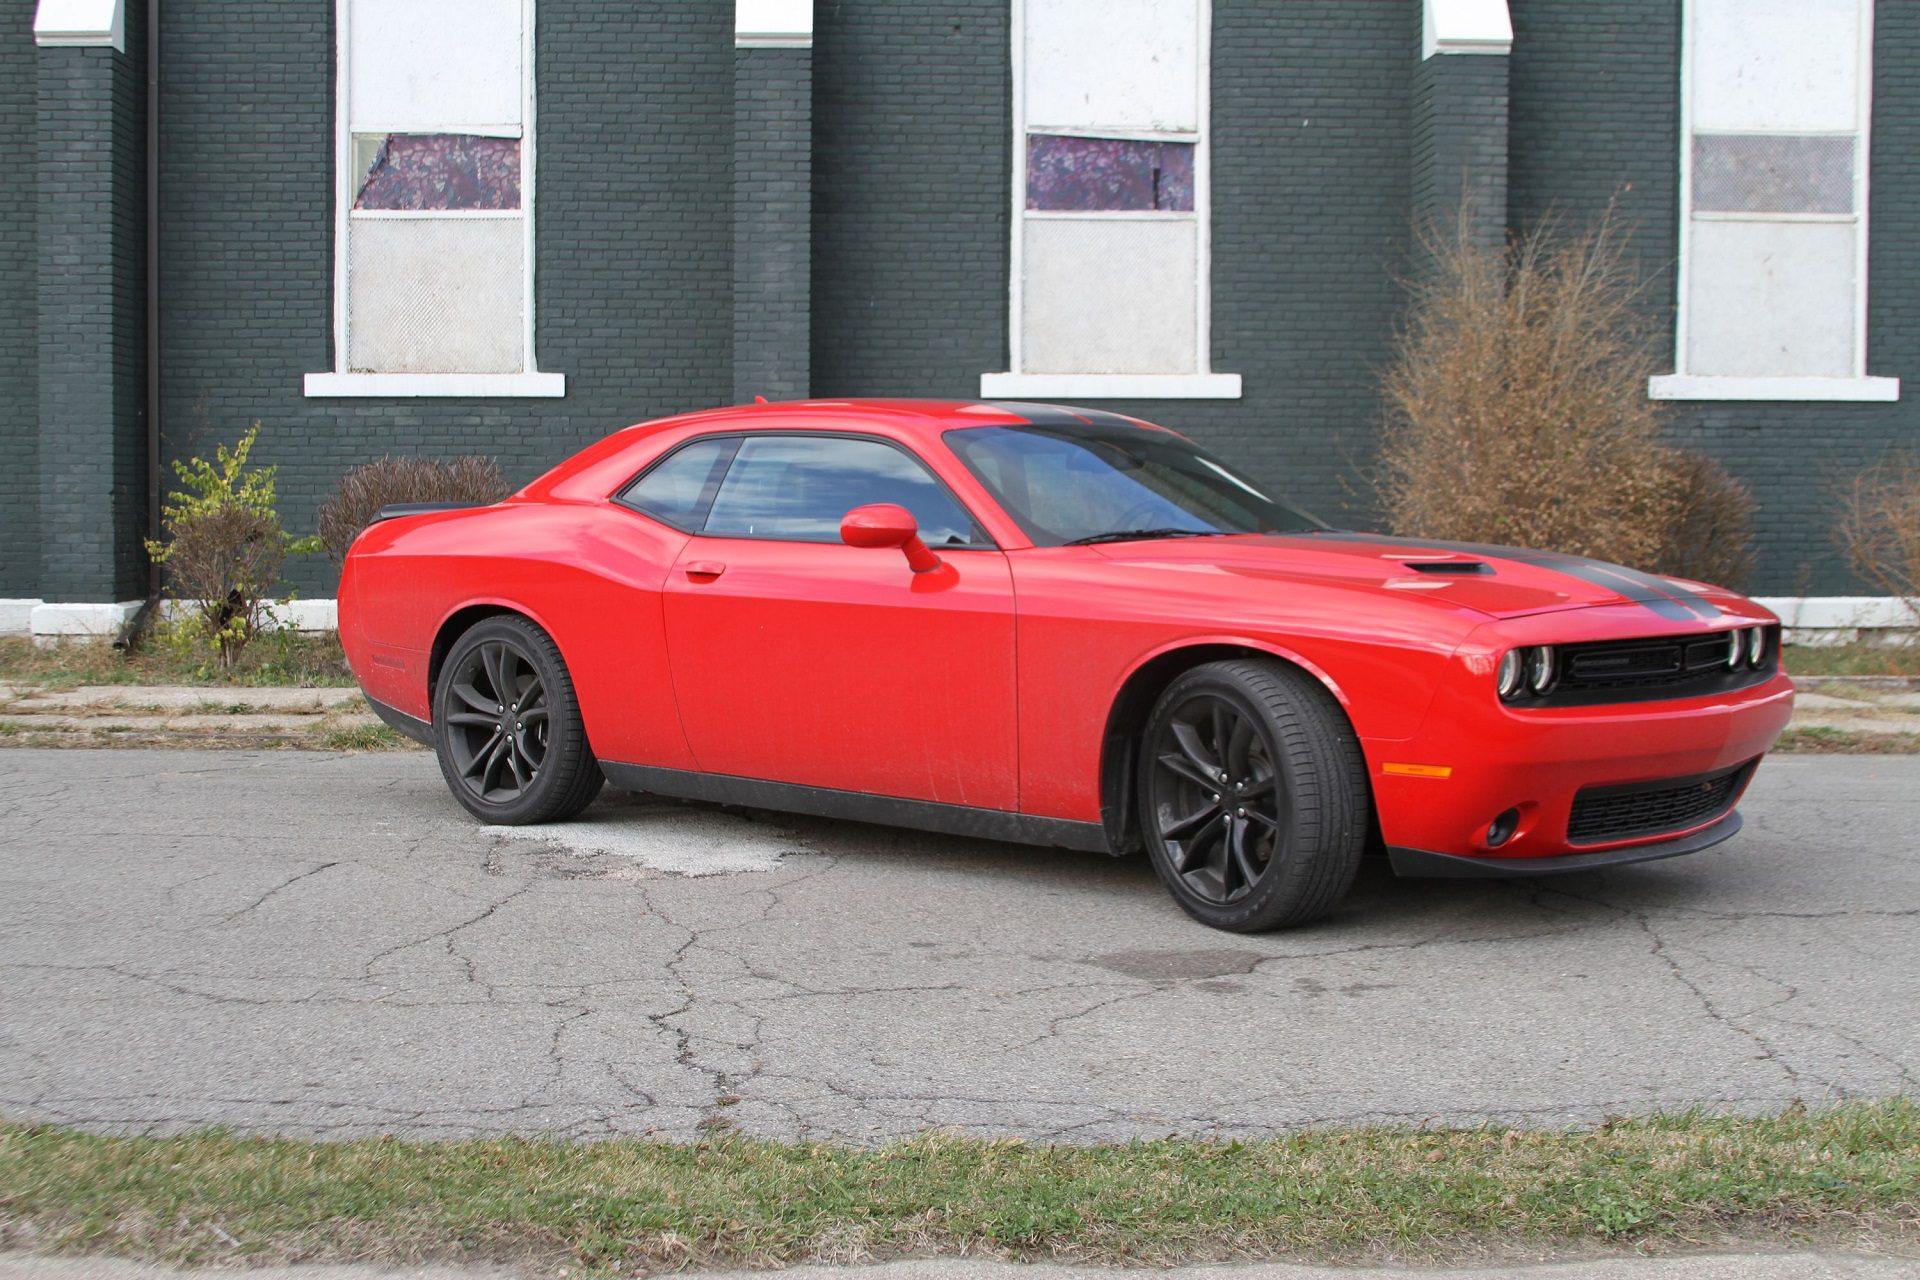 Front angled view of a red Dodge Challenger SXT